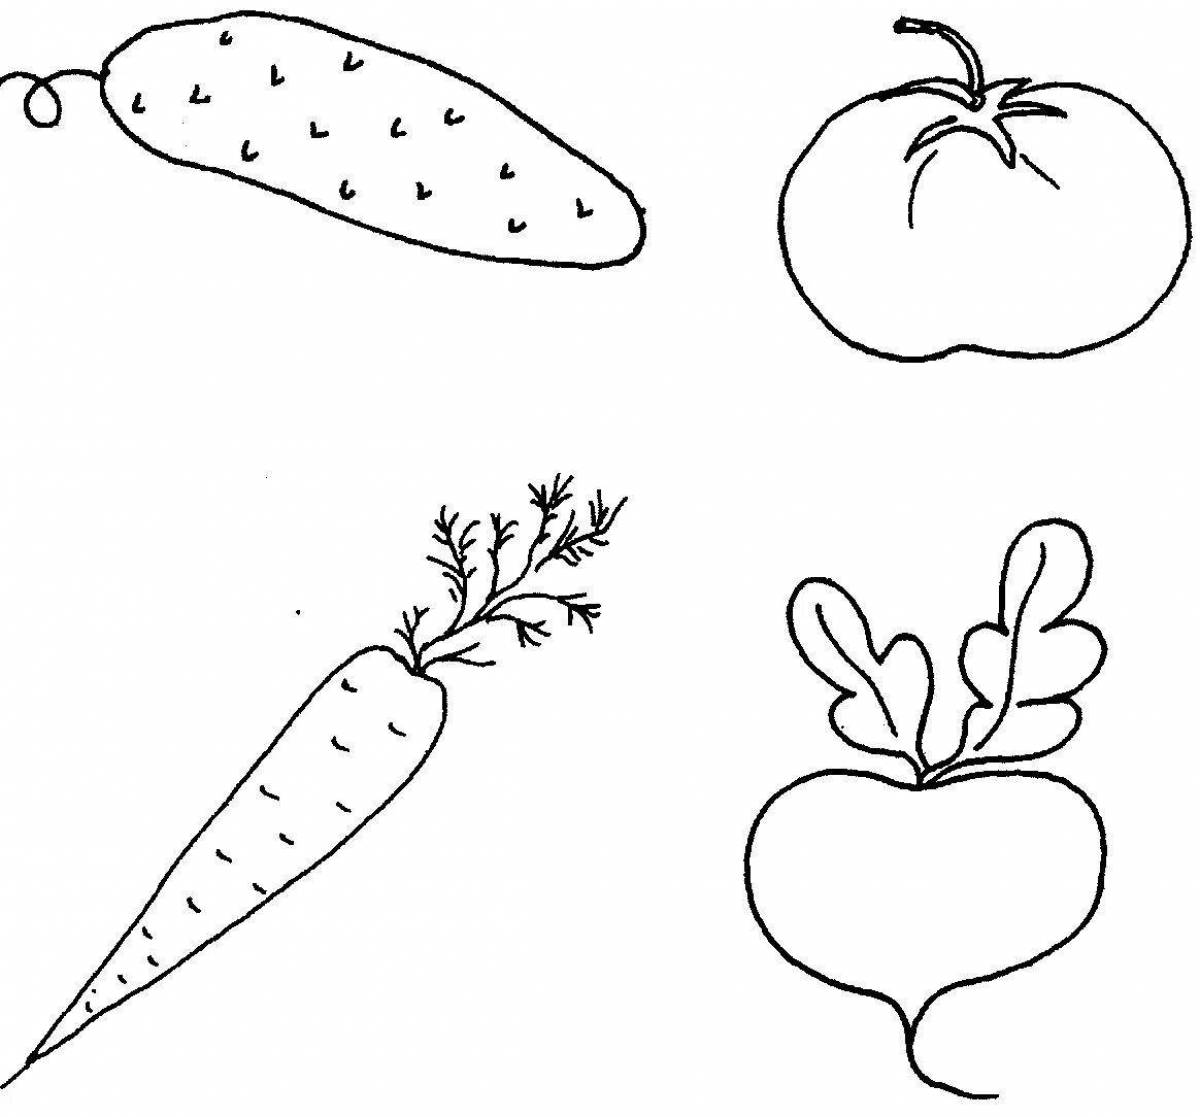 Fun coloring of vegetables for children 3 years old